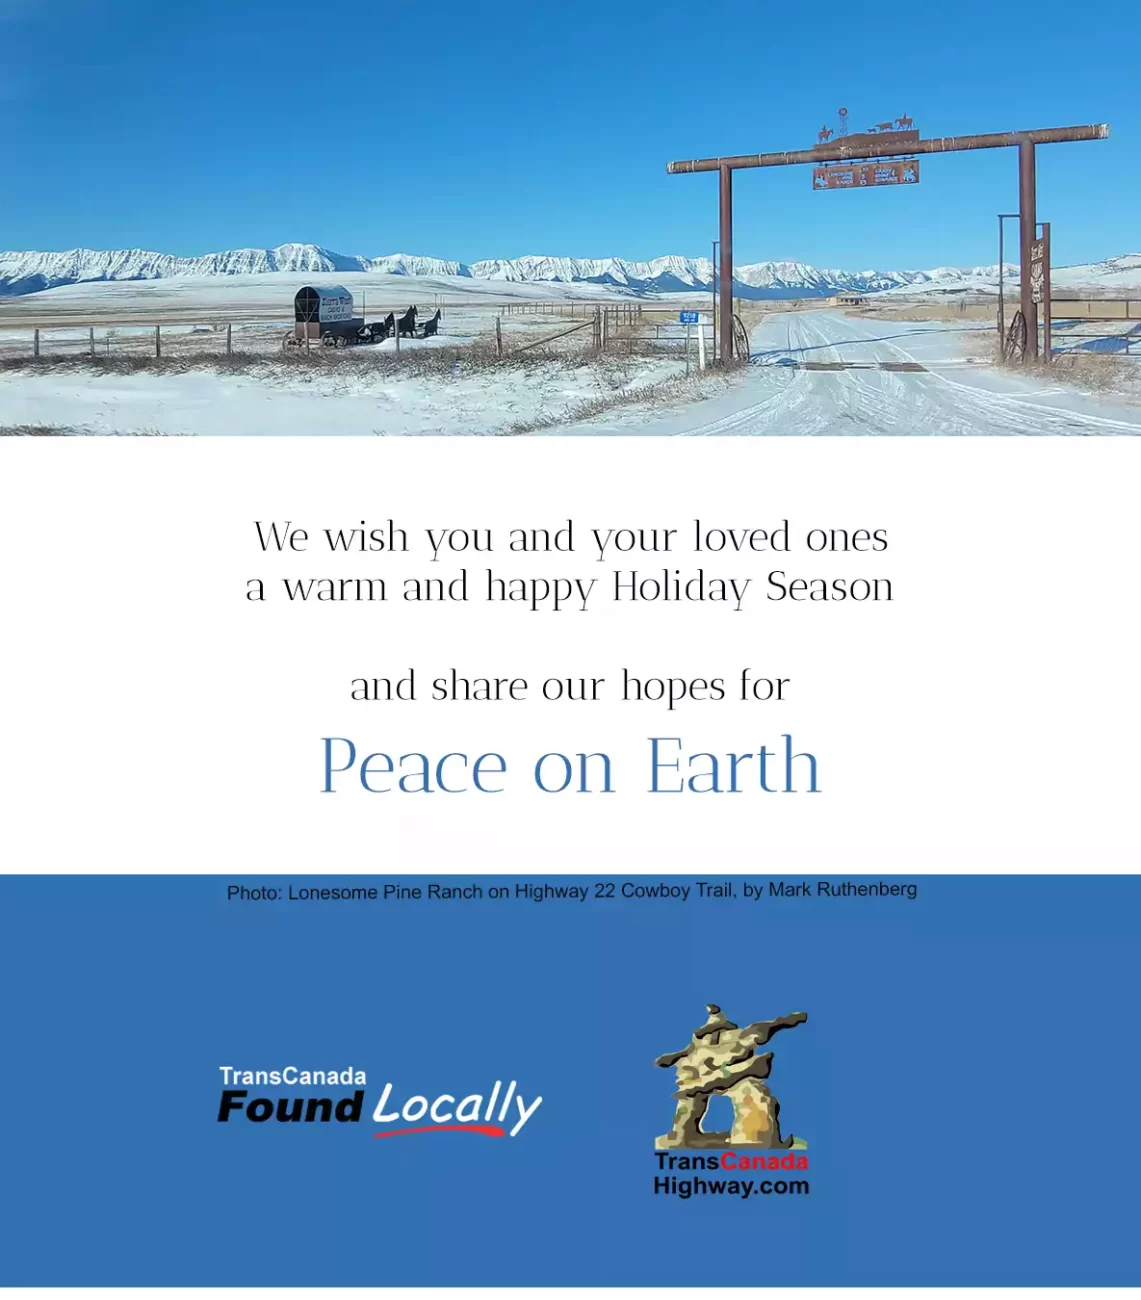 We wish you and your loved ones a warm and happy Holiday Season and share our hopes for Peace on Earth